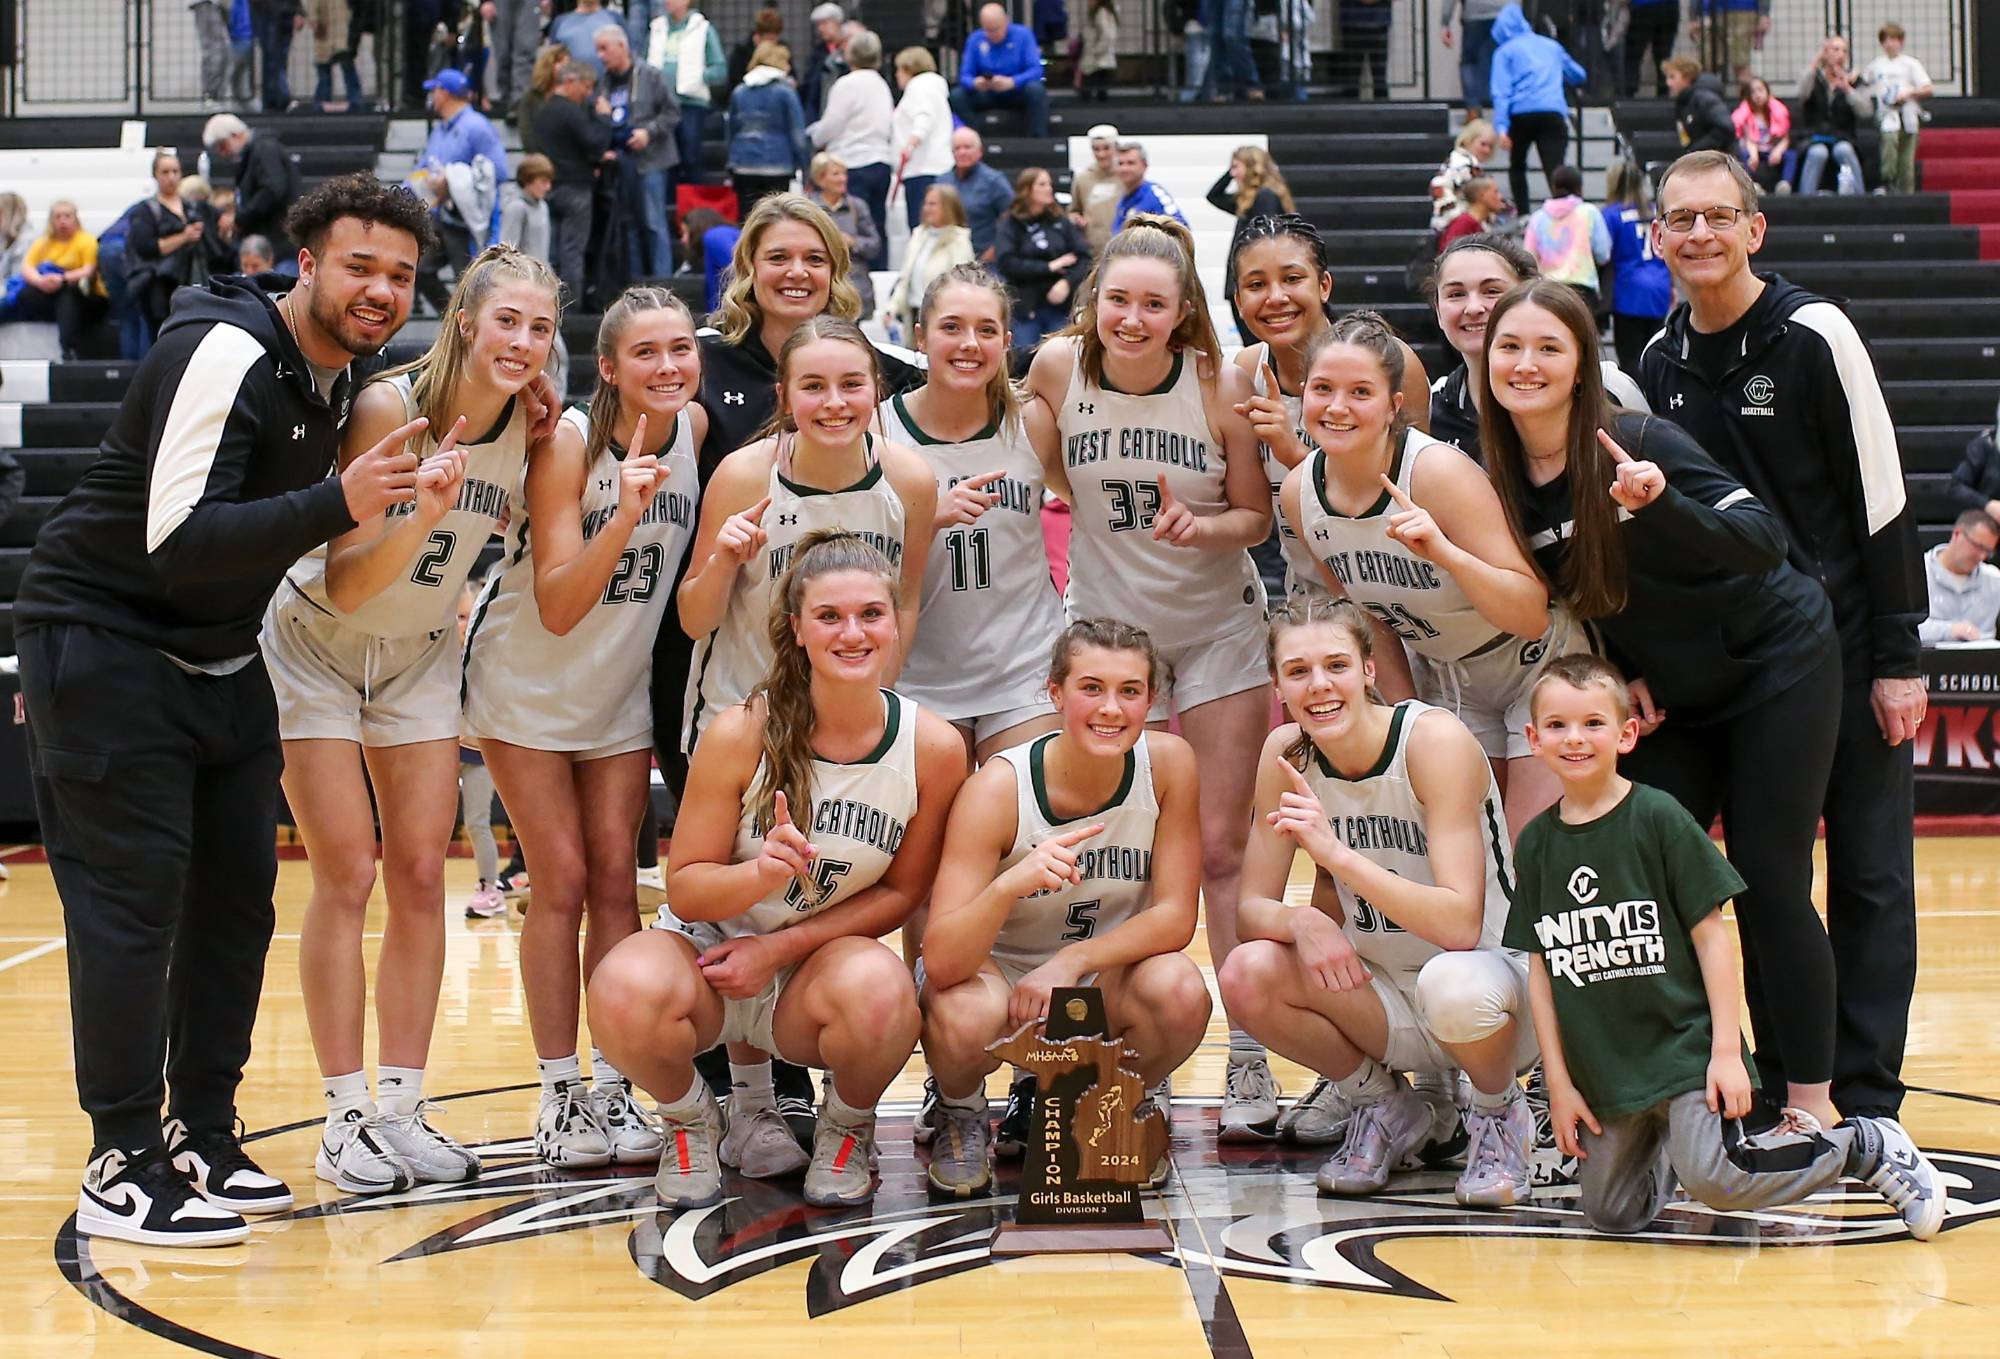 1710187659_C32U5872-2.JPG - Image for Lady Falcons are District Champs!